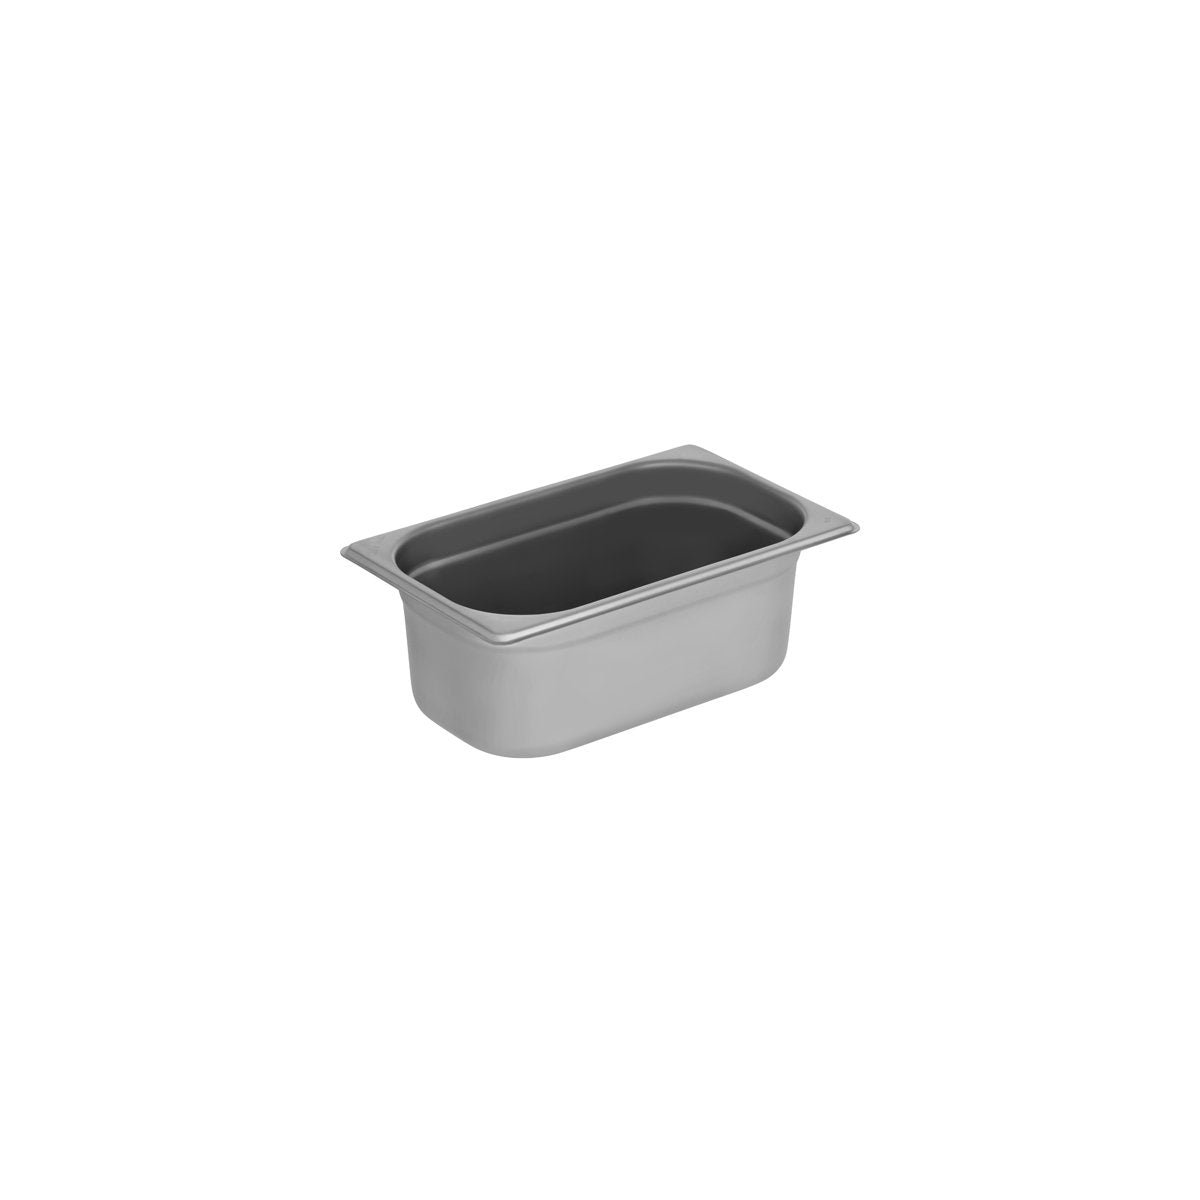 GN-14100 Chef Inox Gastronorm Pan 1/4 Size 100mm Tomkin Australia Hospitality Supplies